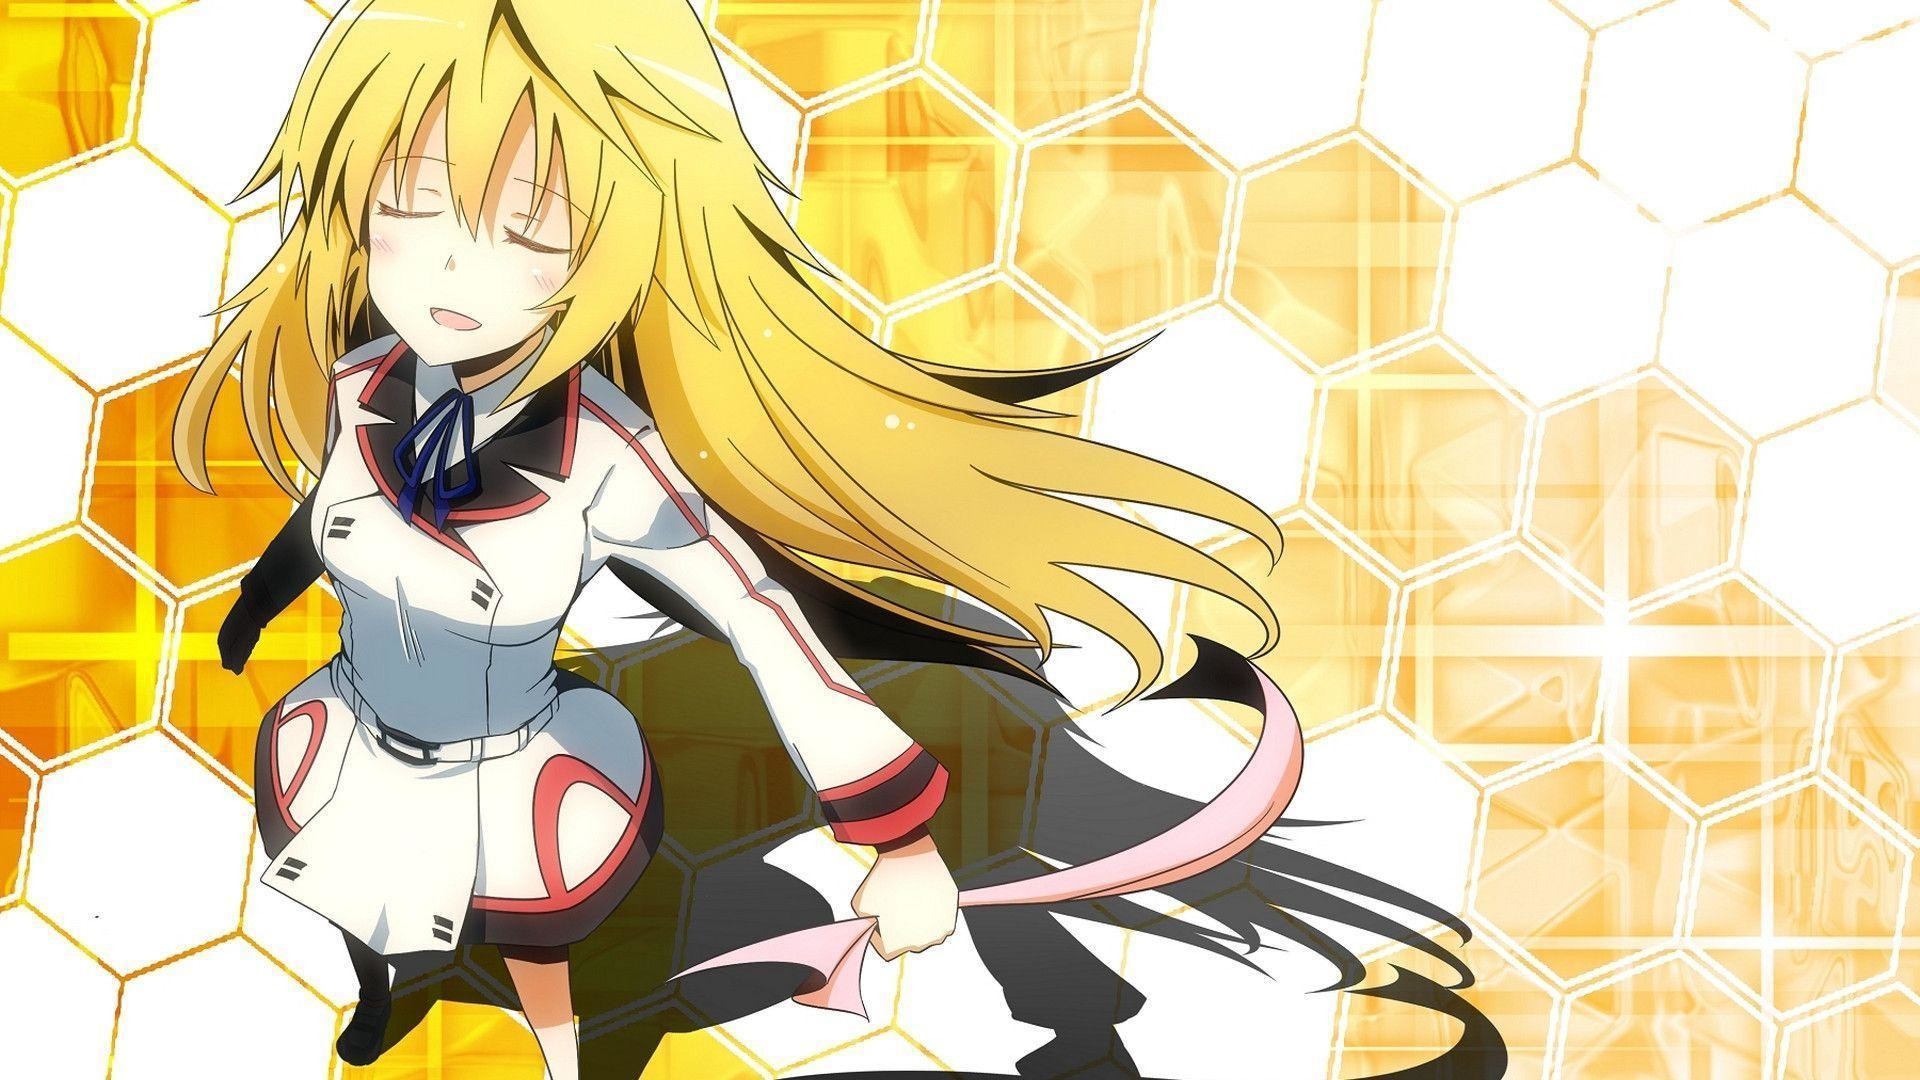 1920x1080 Infinite Stratos Wallpaper 29 244043 Images HD Wallpapers| Wallfoy .